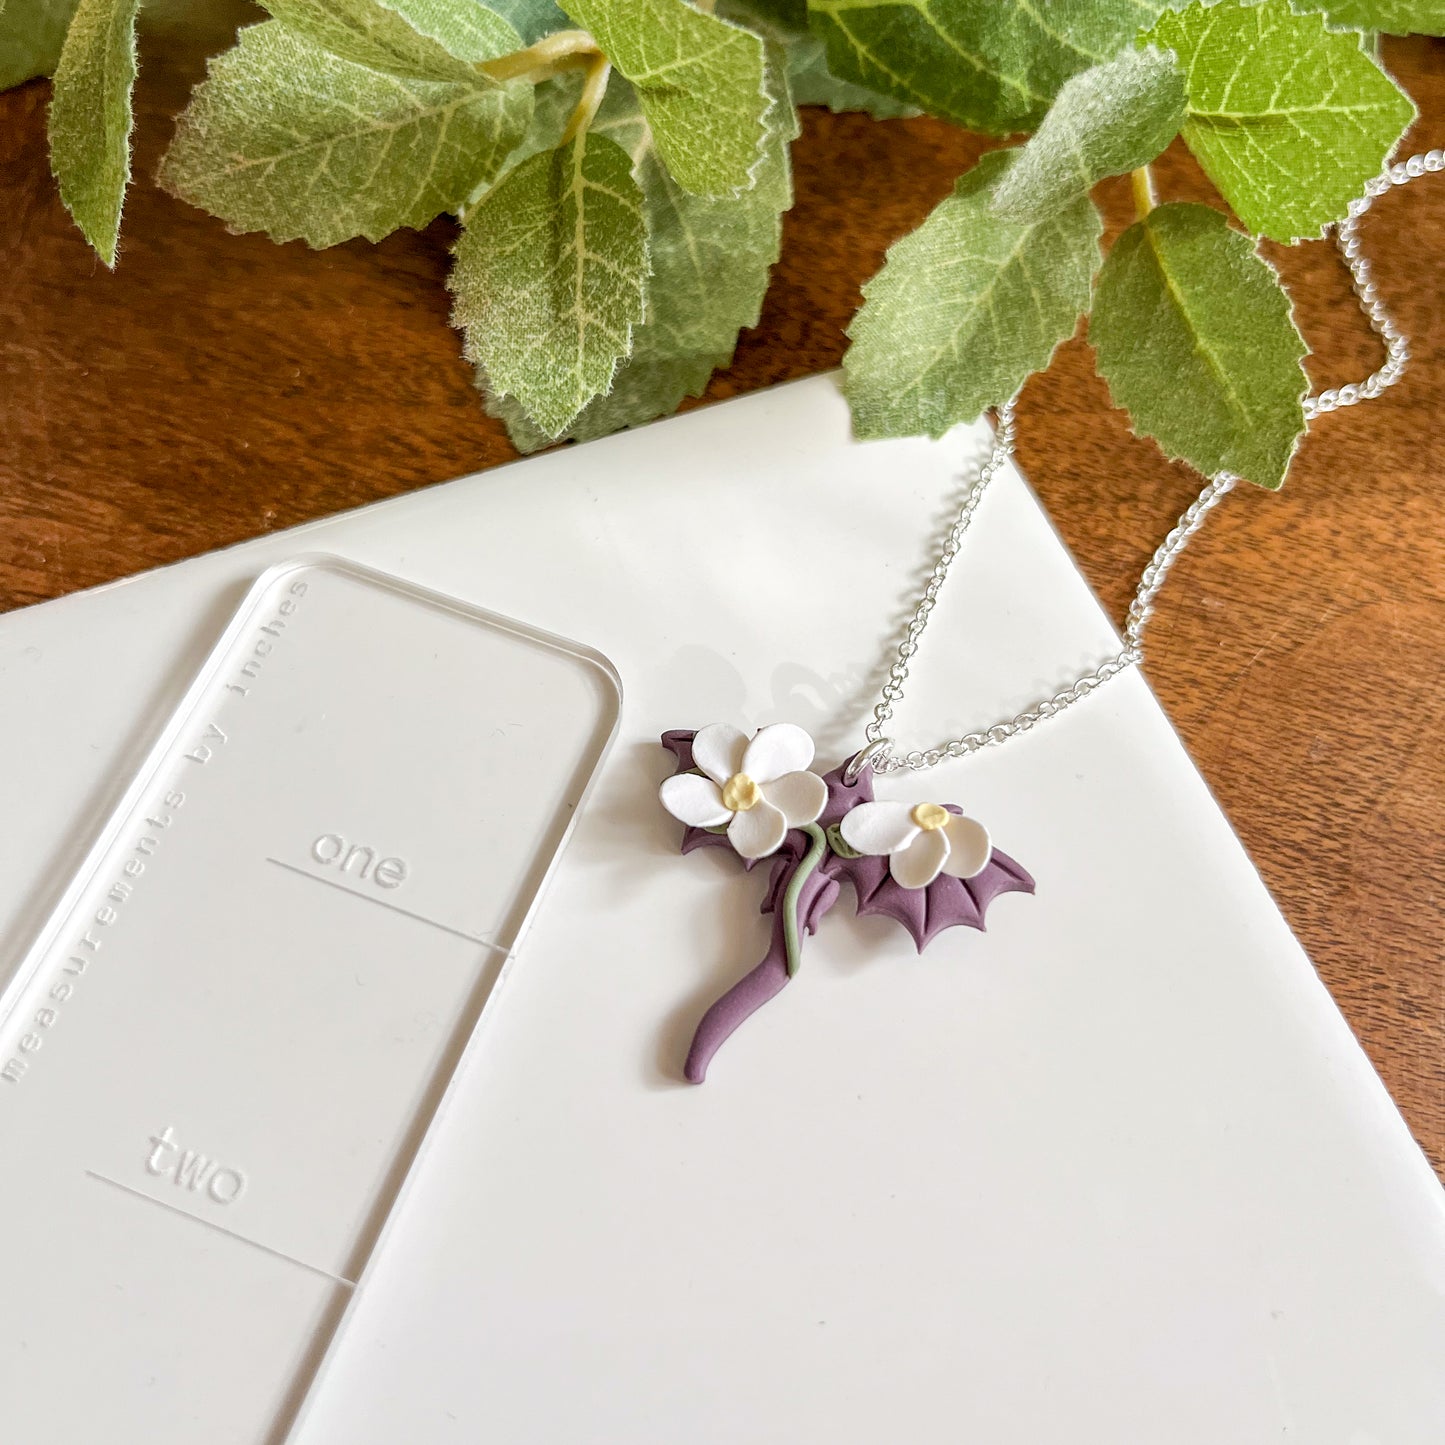 Small purple dragon necklace with white floral details | 18" chain